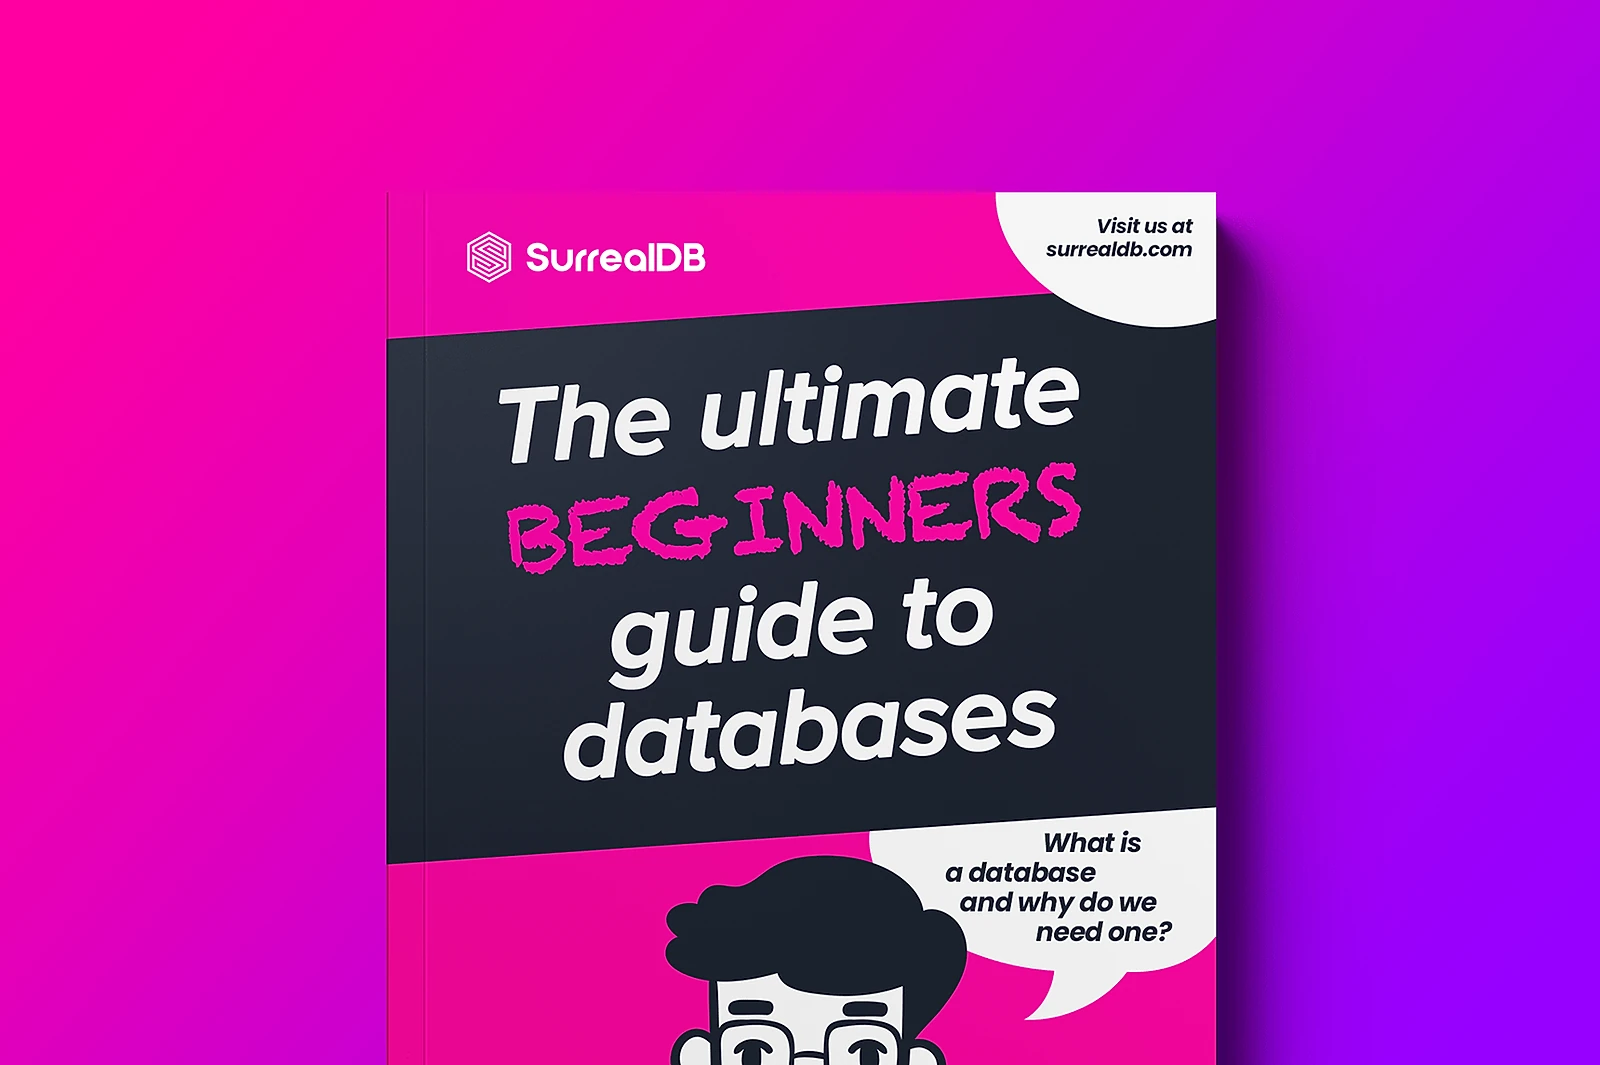 The ultimate beginners guide to databases